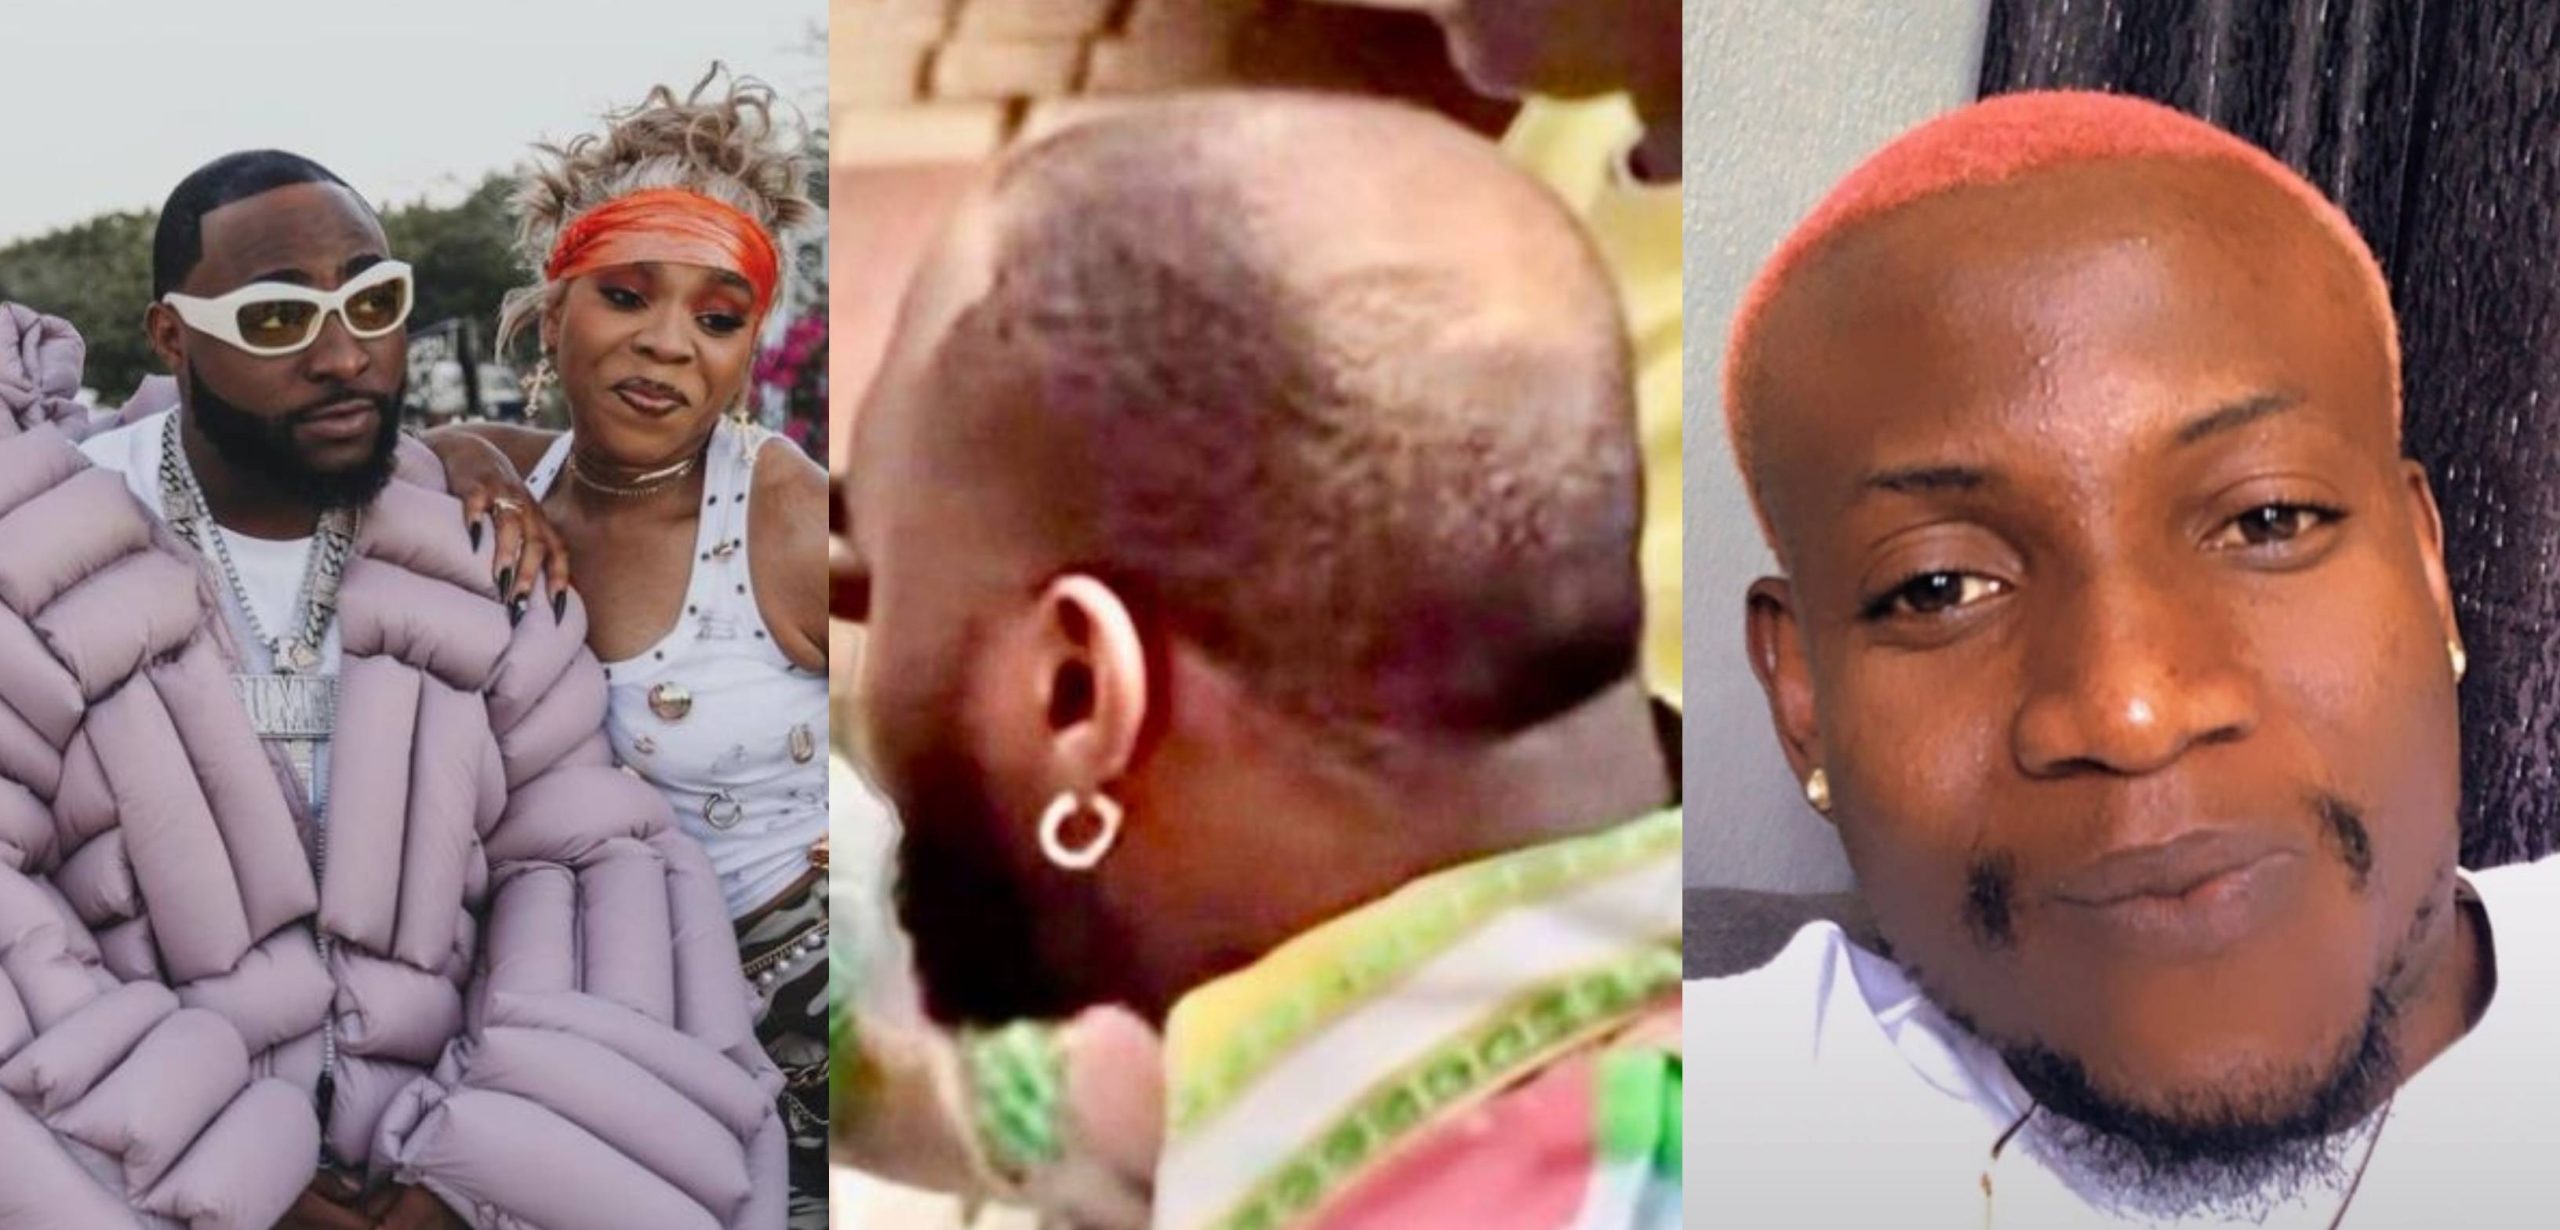  Abuja barber tells Davido to visit his shop as he reacts to the singer’s hairstyle in hit song Kante music video